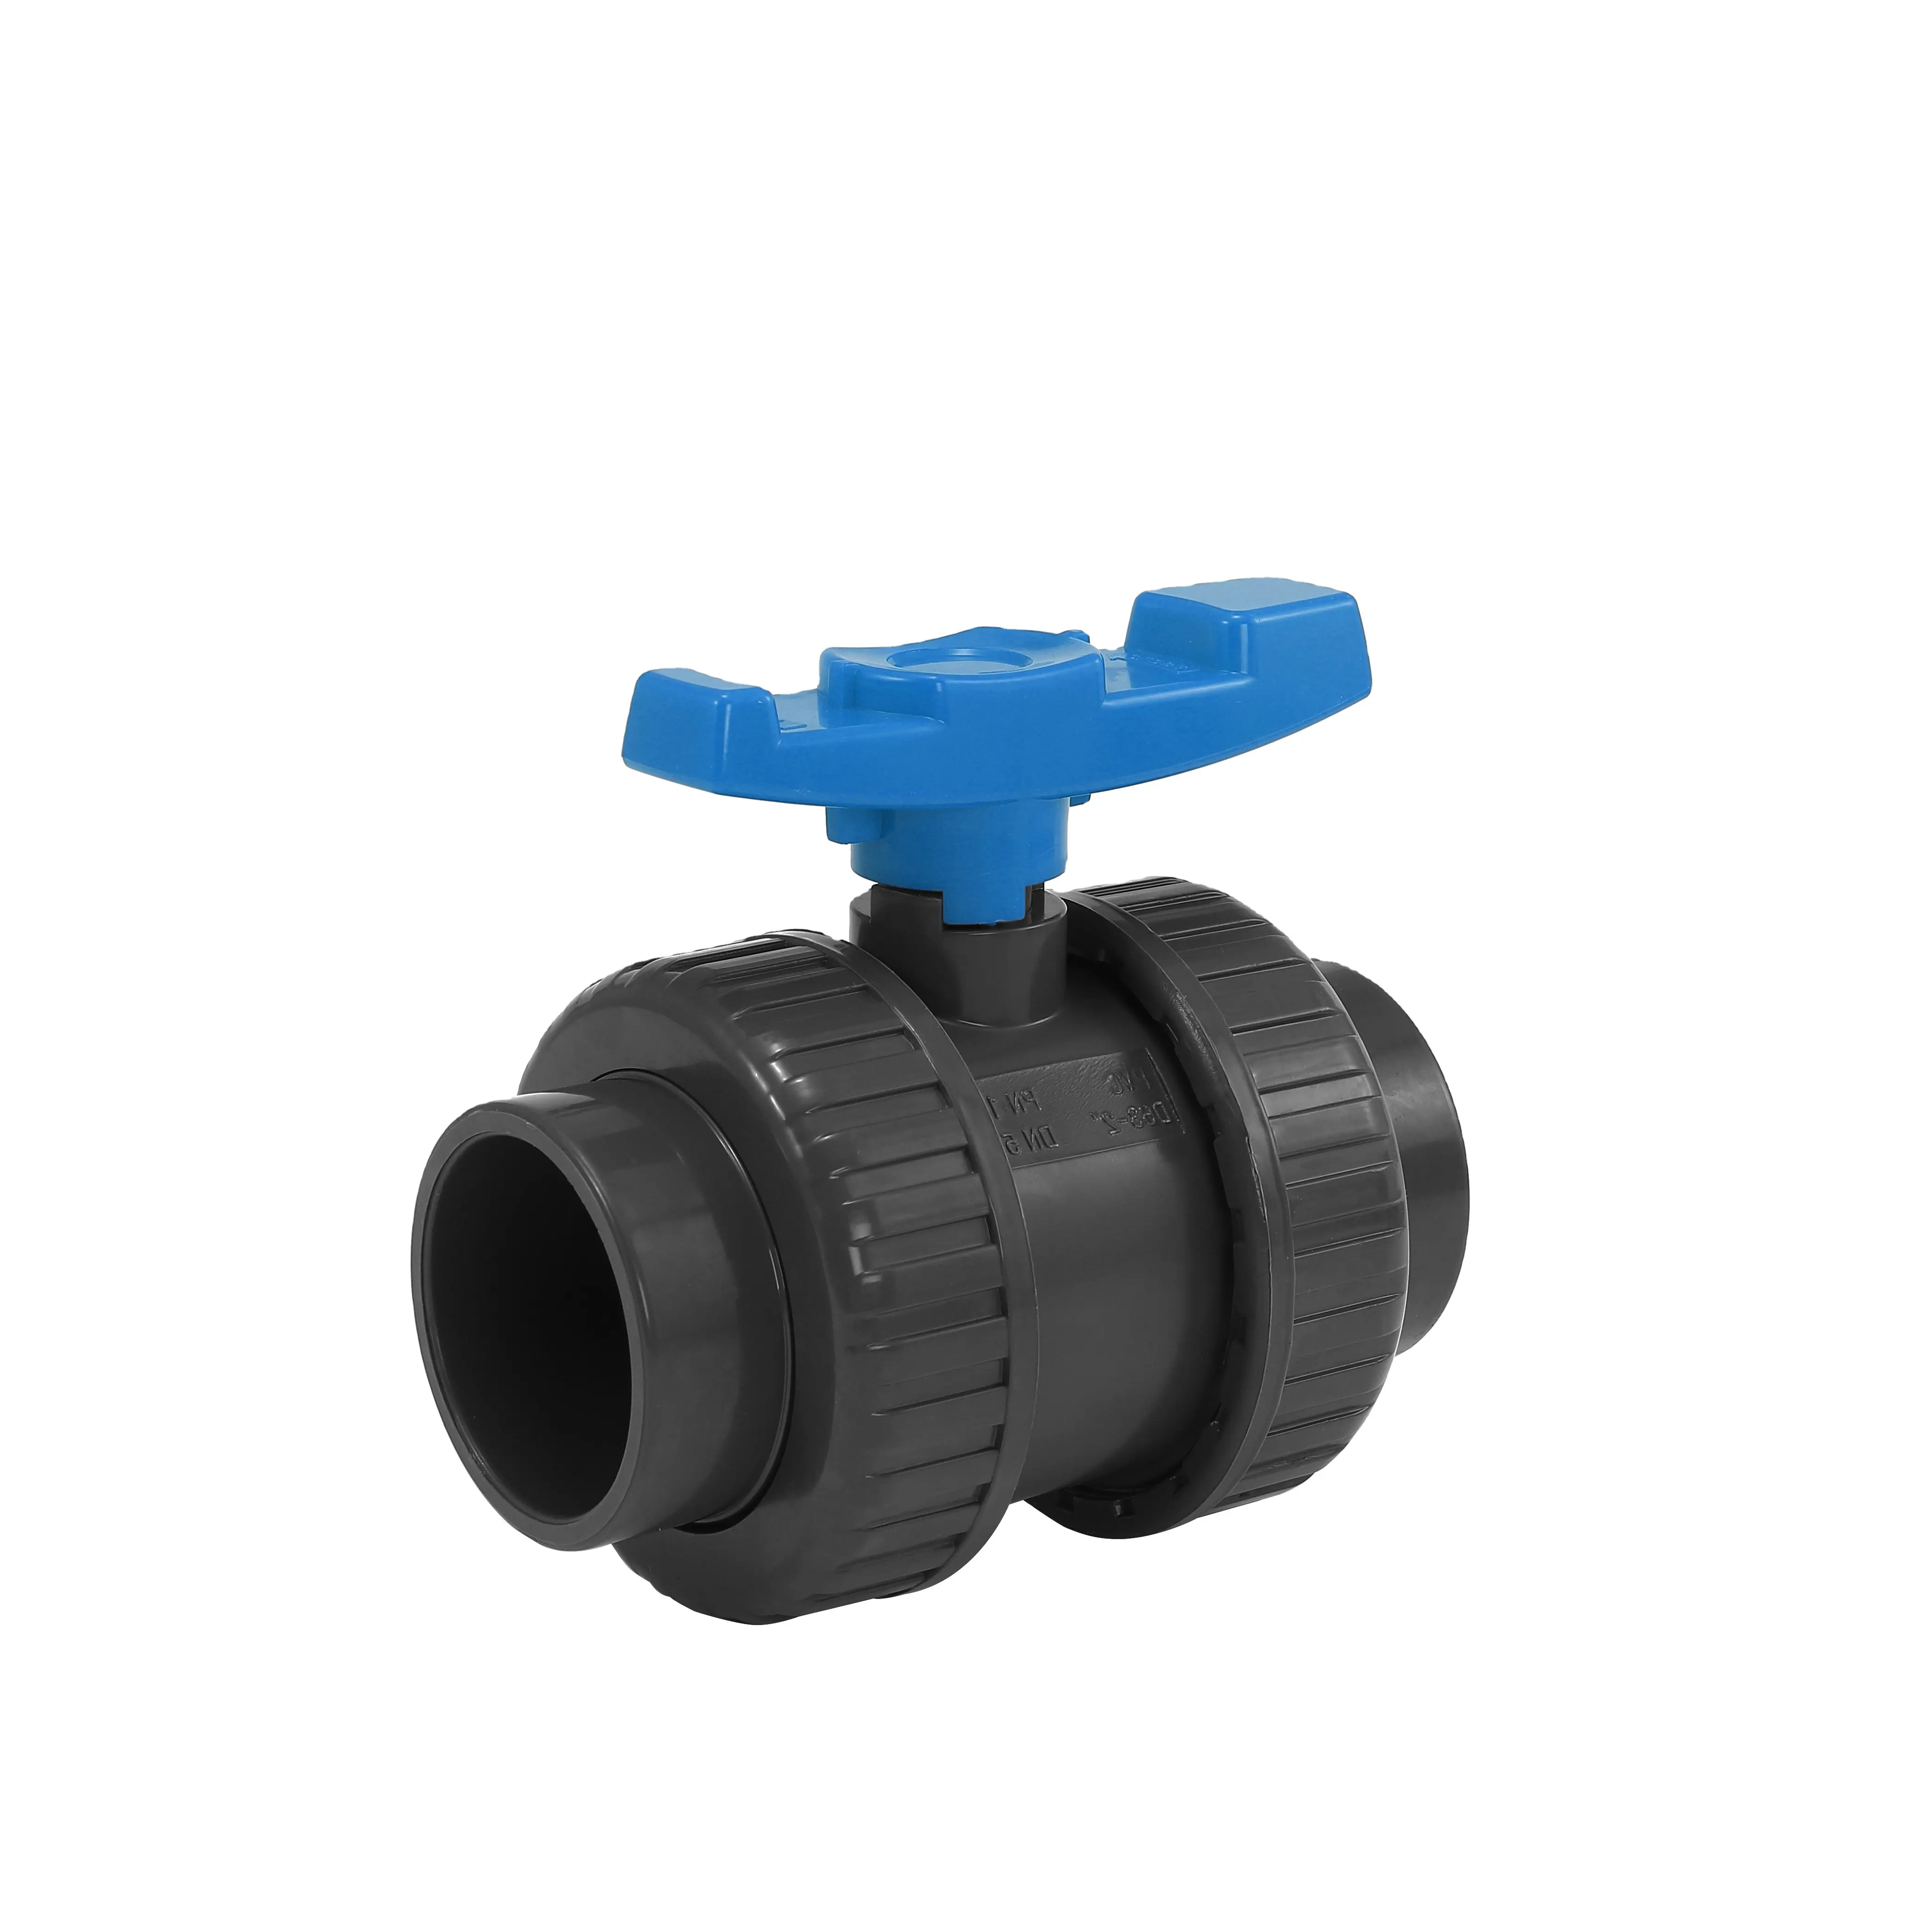 Hot Sale PVC Double Union Ball Valve General Application for All Sizes Customizable OEM ODM Support